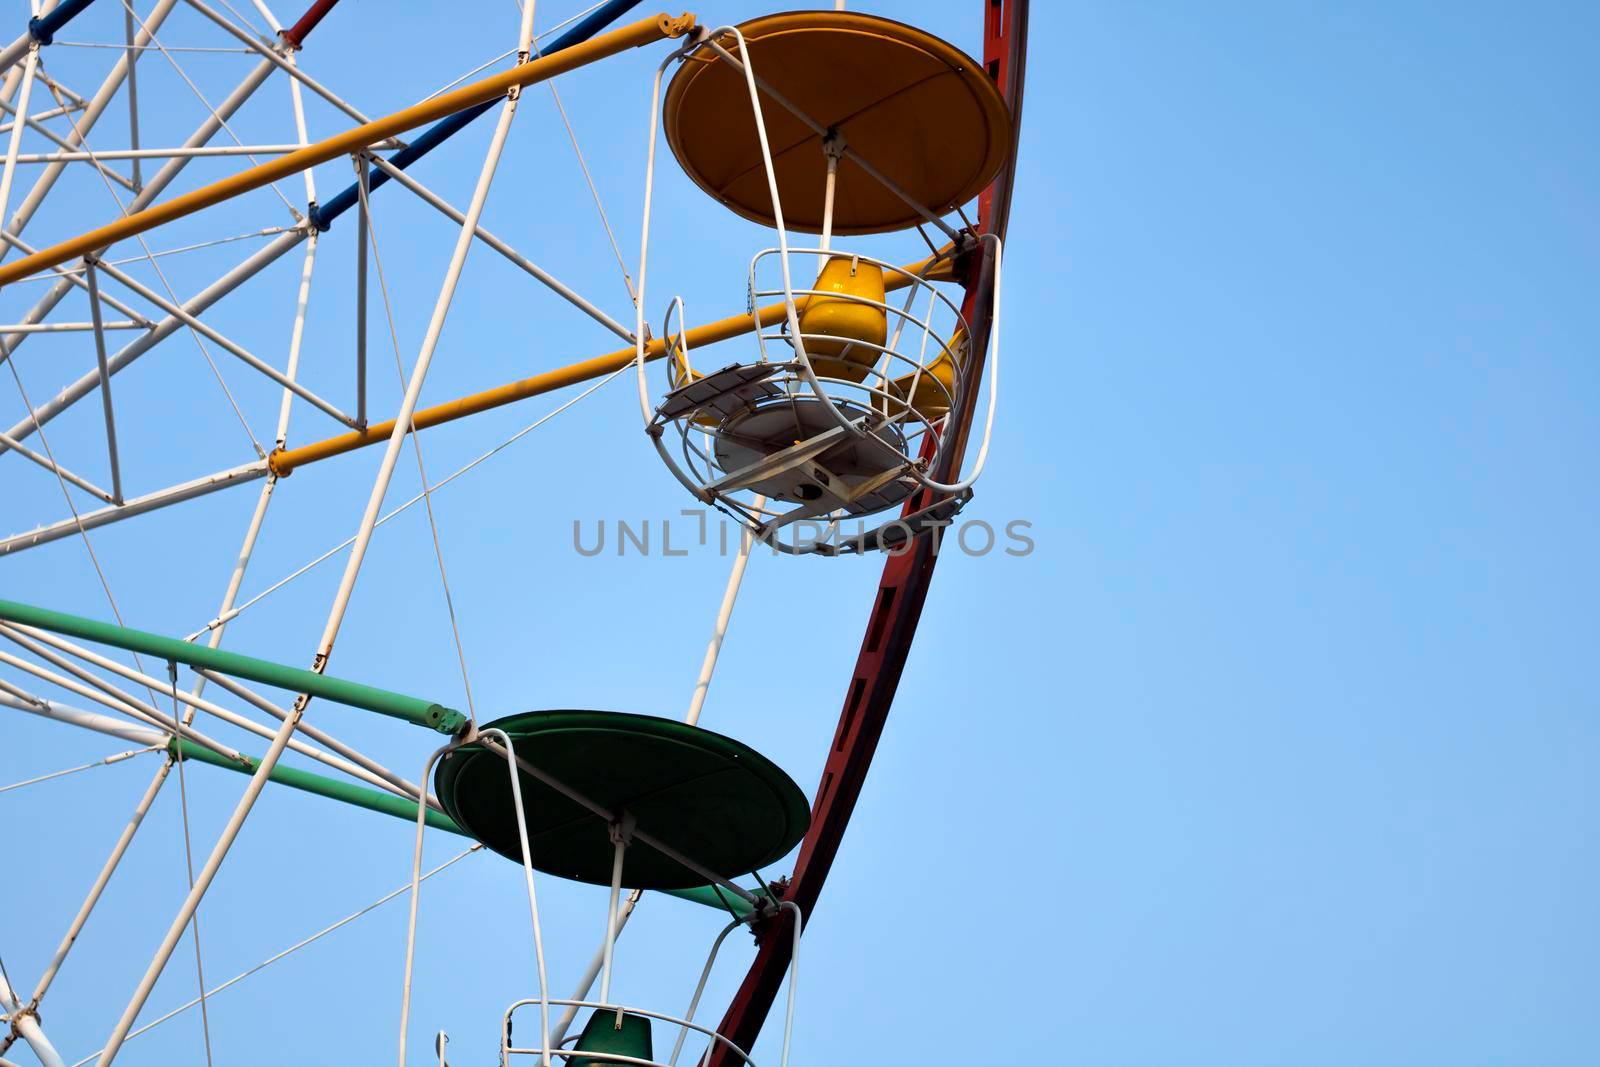 Close-up of a multi-colored Ferris wheel in an amusement park against a background of blue sky. by Sonluna